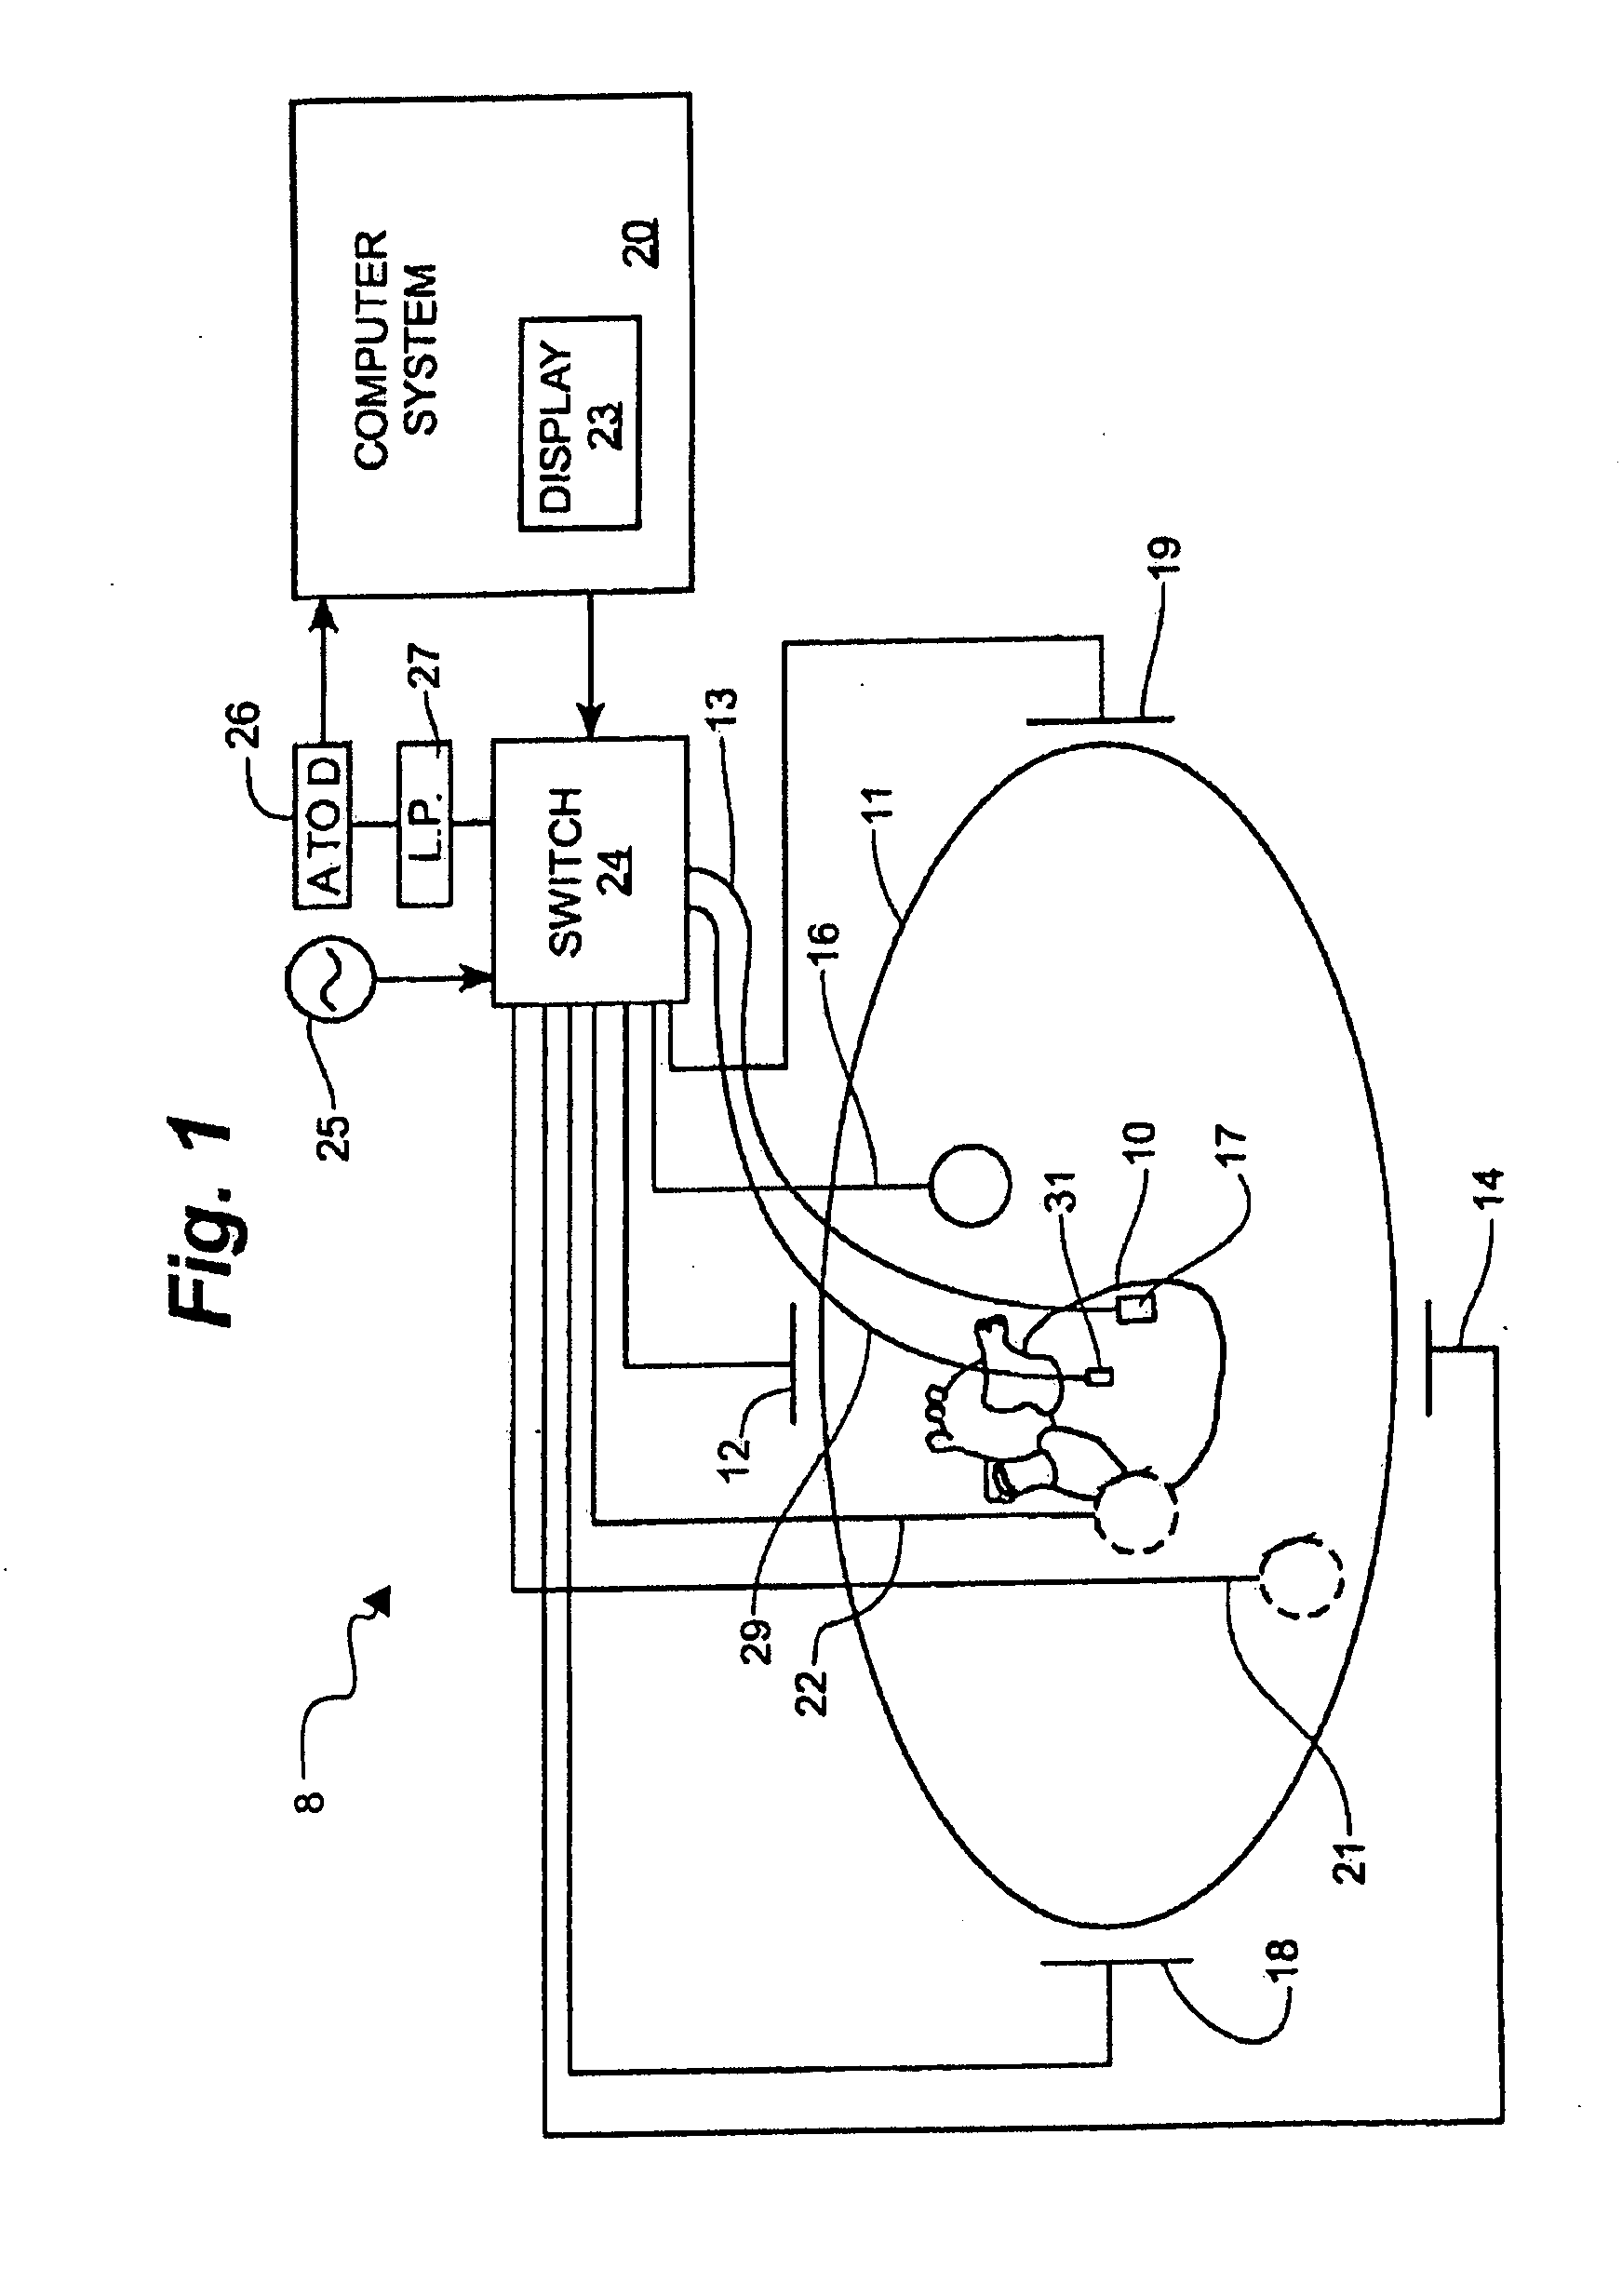 System and method for correction of inhomogeneous fields